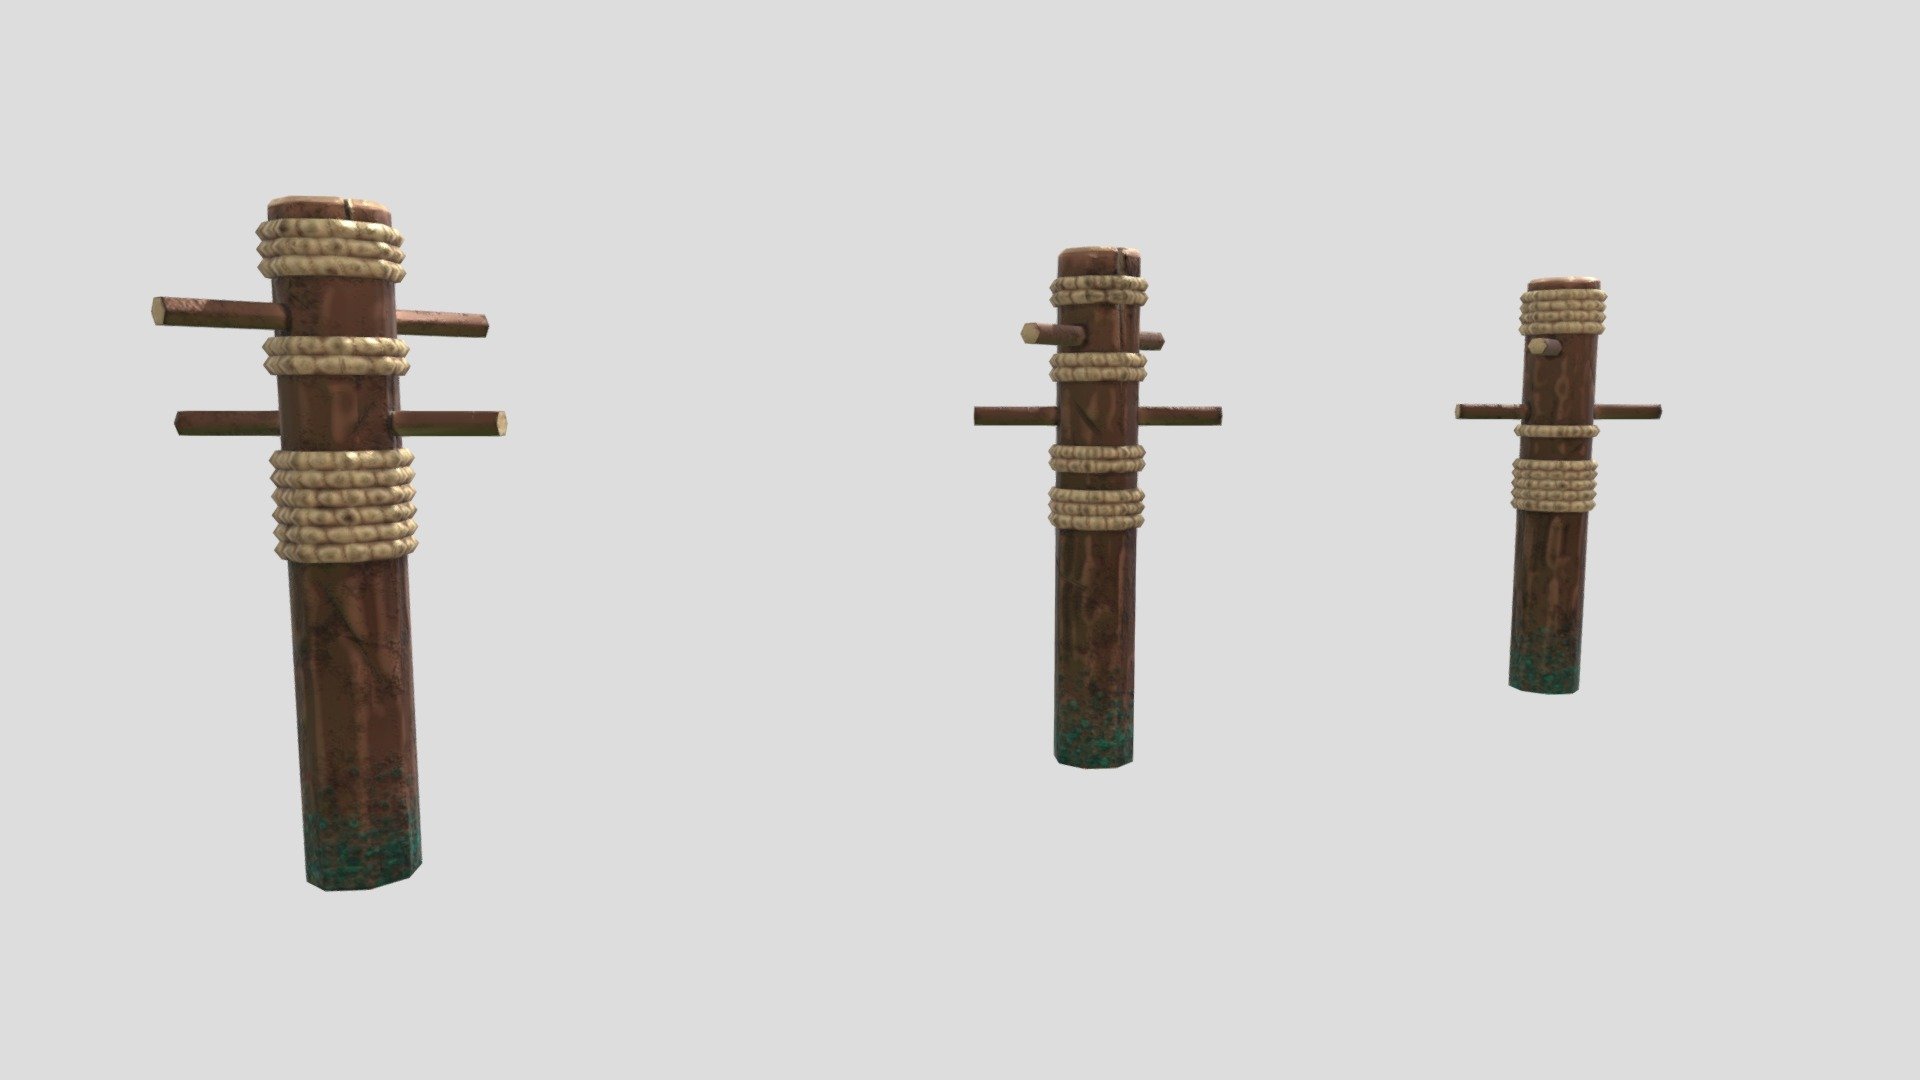 The sword training dummies for the training area in the elven starting village of a game project I'm working 3d model